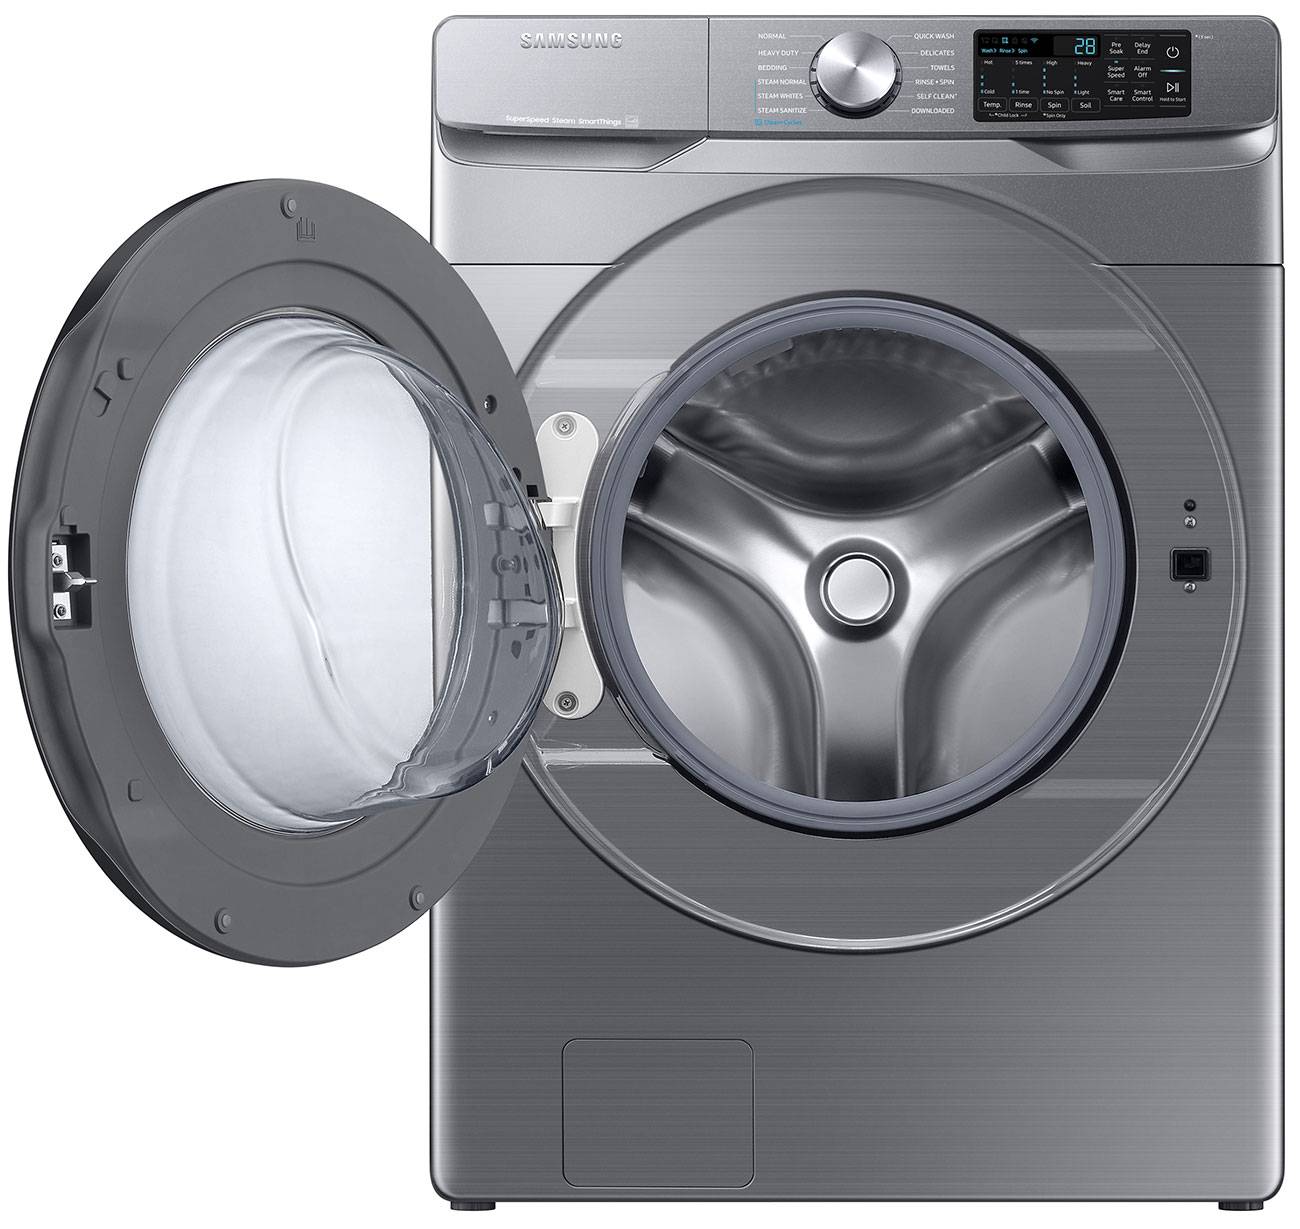 The Samsung Bespoke Ultra Capacity Front Loading Washer and Dryer review